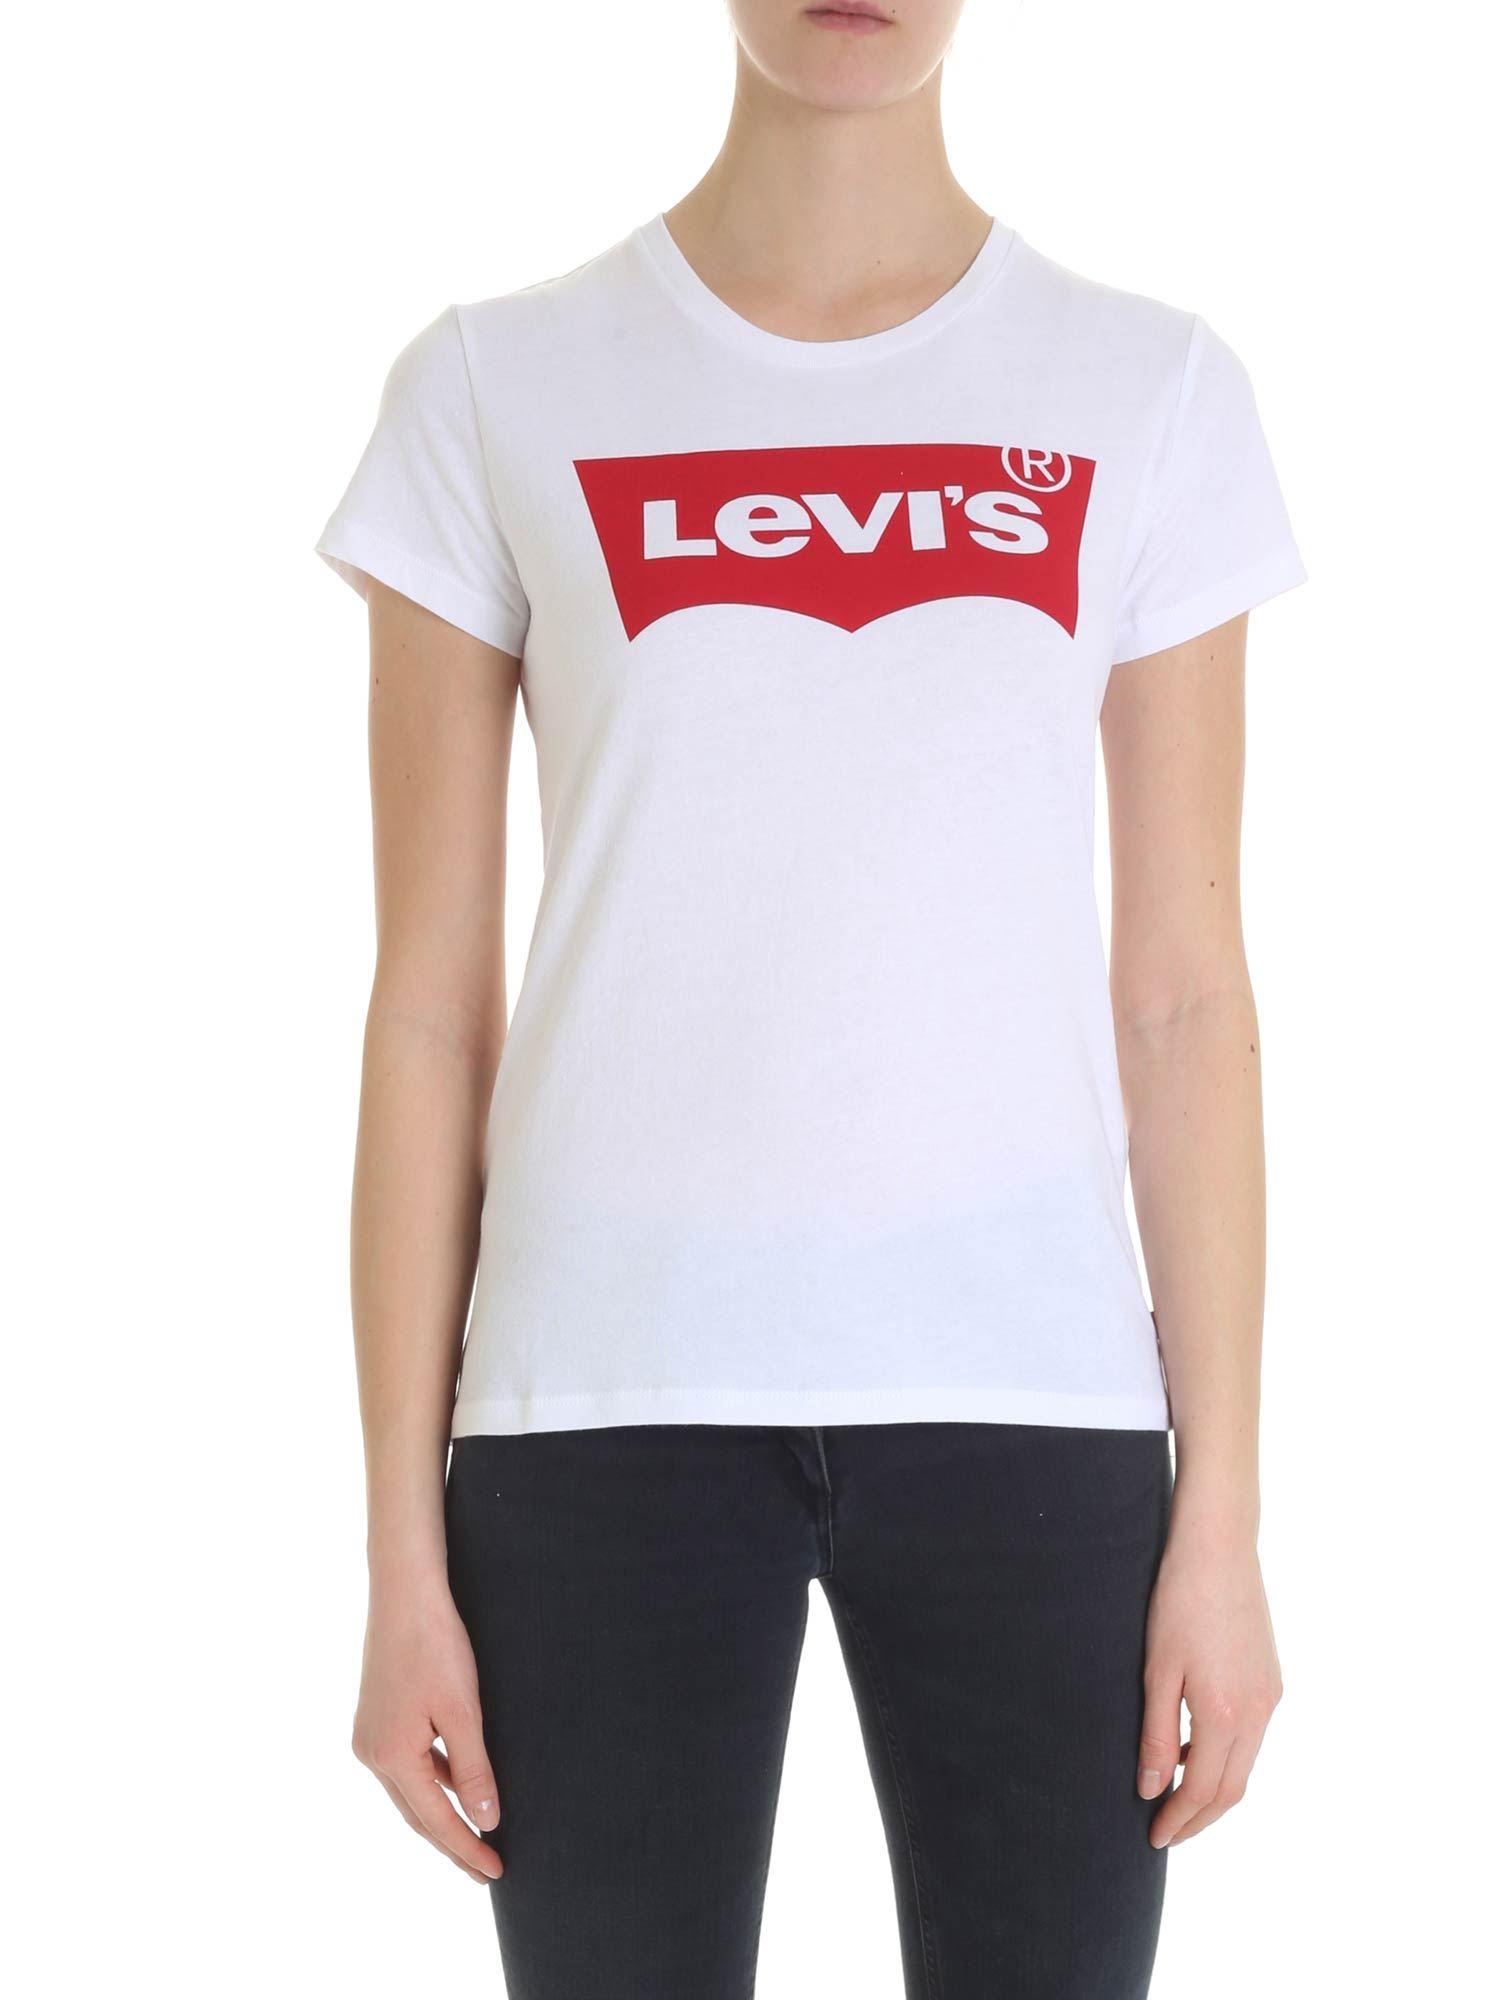 levi's red and white shirt